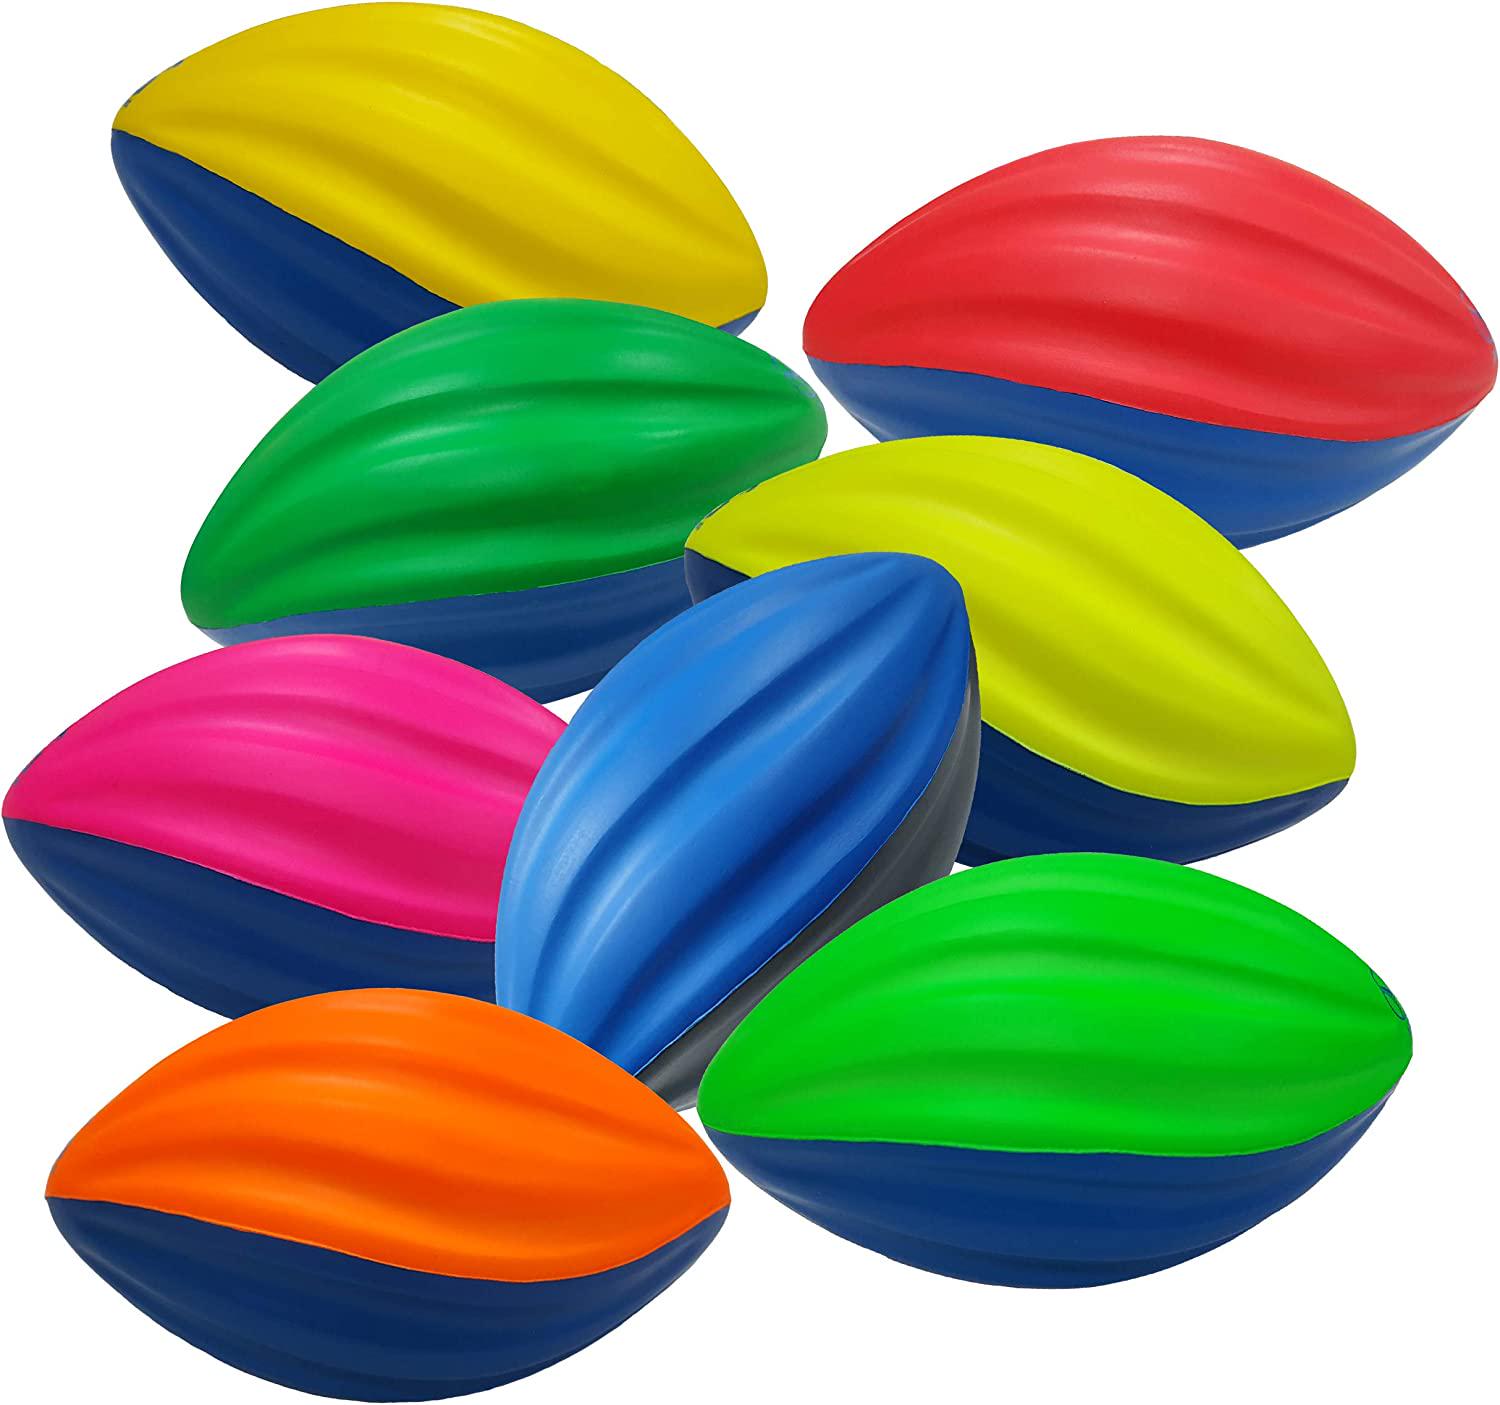 MG MACRO GIANT, Macro Giant 6 Inch Foam Football / 5 Inch Foam Spiral Football, Set of 8, Assorted Colors, Kid Ball, Training Practice, Playground, Preschool, Parenting Activity, Toy Gift, Business Stuff